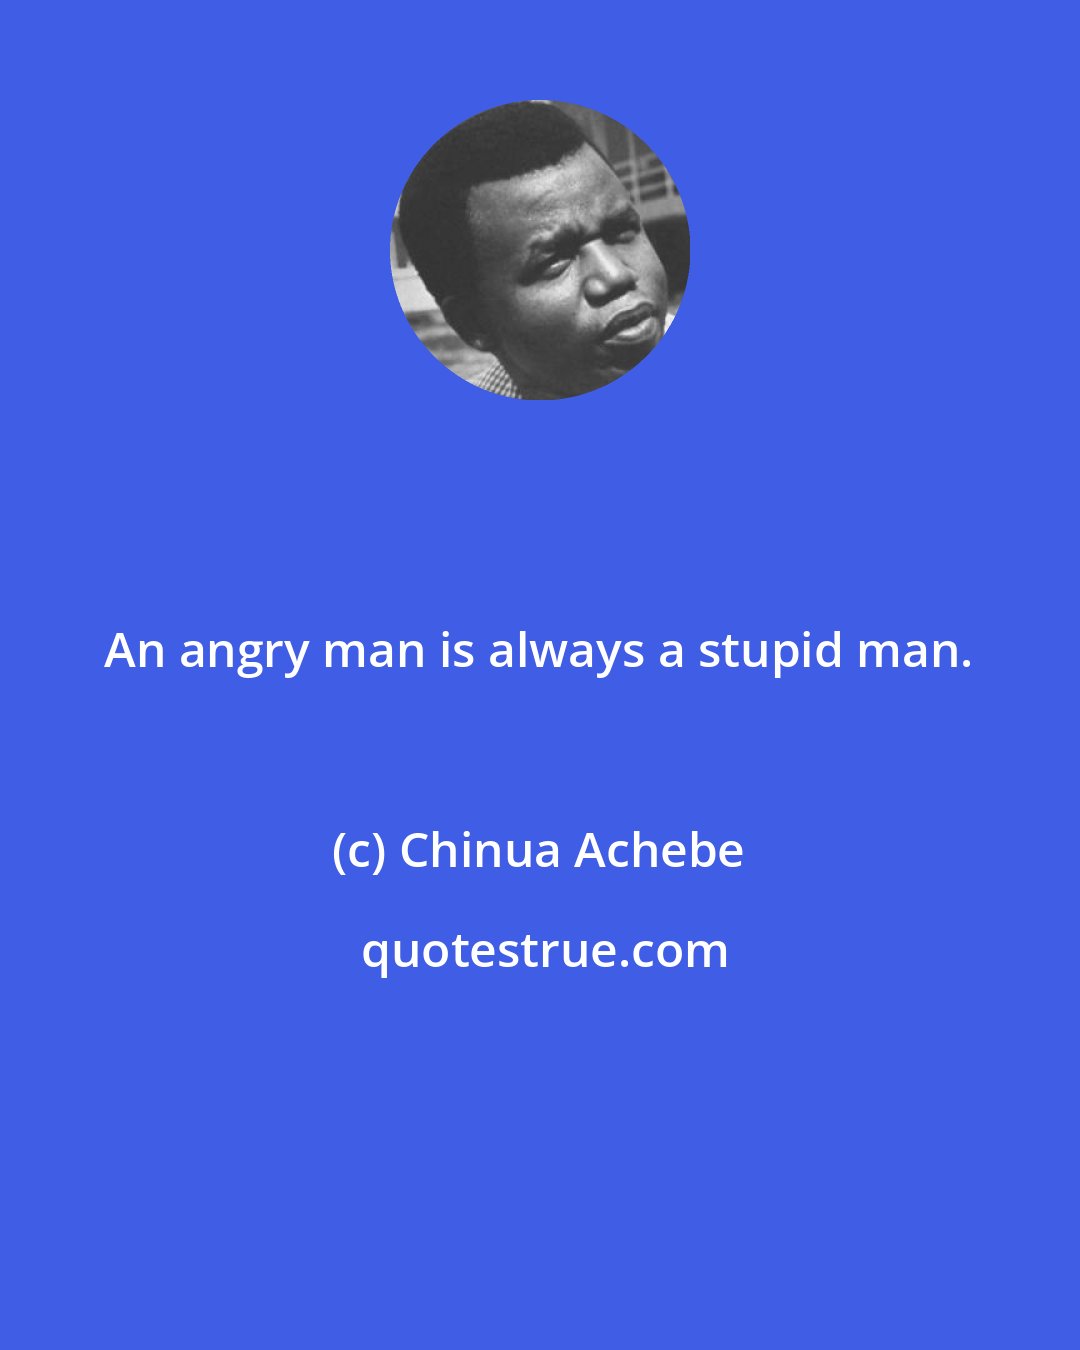 Chinua Achebe: An angry man is always a stupid man.